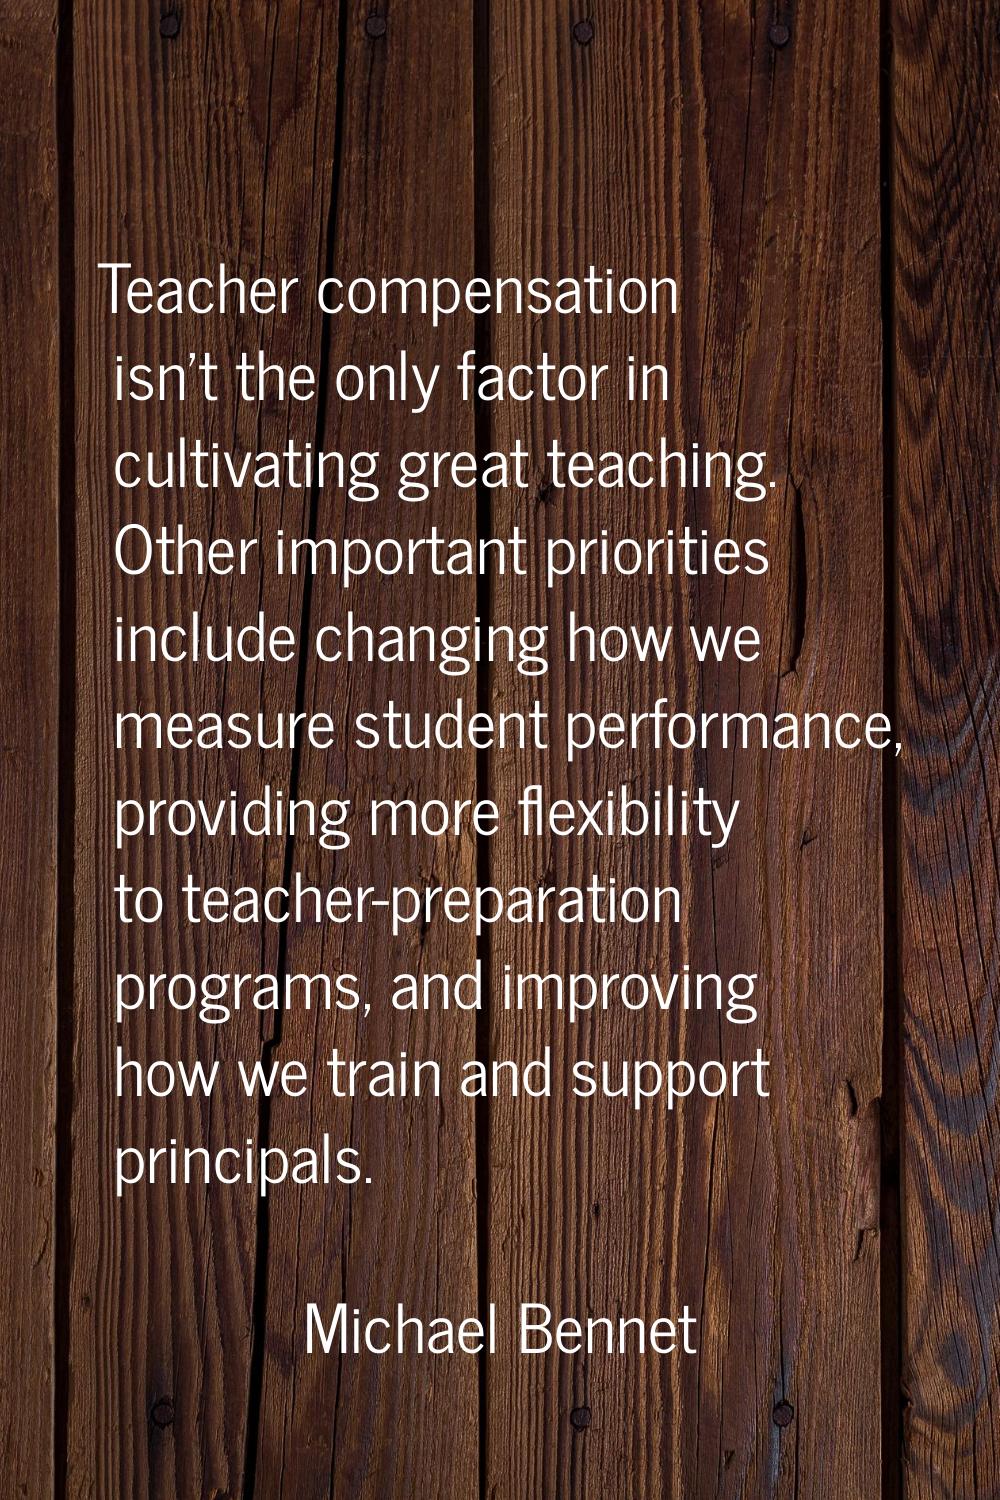 Teacher compensation isn't the only factor in cultivating great teaching. Other important prioritie